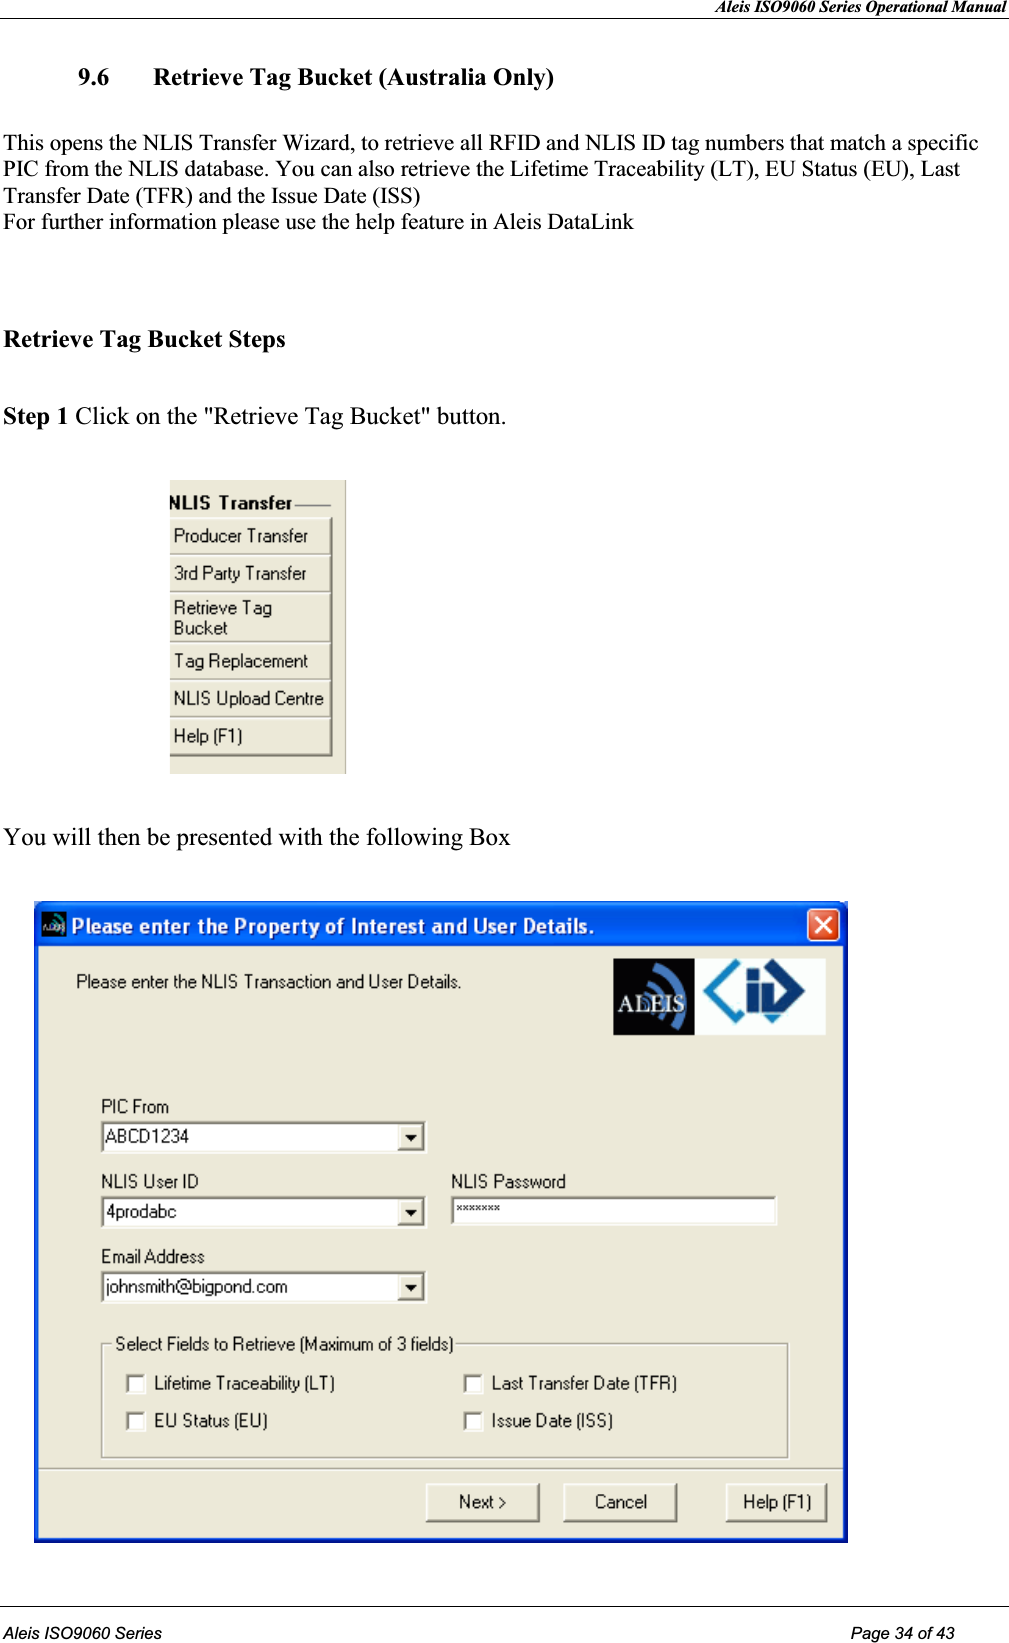 Aleis ISO9060 Series Operational Manual  Aleis ISO9060 Series Page 34 of 43 9.6  Retrieve Tag Bucket (Australia Only)  This opens the NLIS Transfer Wizard, to retrieve all RFID and NLIS ID tag numbers that match a specific PIC from the NLIS database. You can also retrieve the Lifetime Traceability (LT), EU Status (EU), Last Transfer Date (TFR) and the Issue Date (ISS)                                                                                                        For further information please use the help feature in Aleis DataLink   Retrieve Tag Bucket Steps  Step 1 Click on the &quot;Retrieve Tag Bucket&quot; button.                             You will then be presented with the following Box         